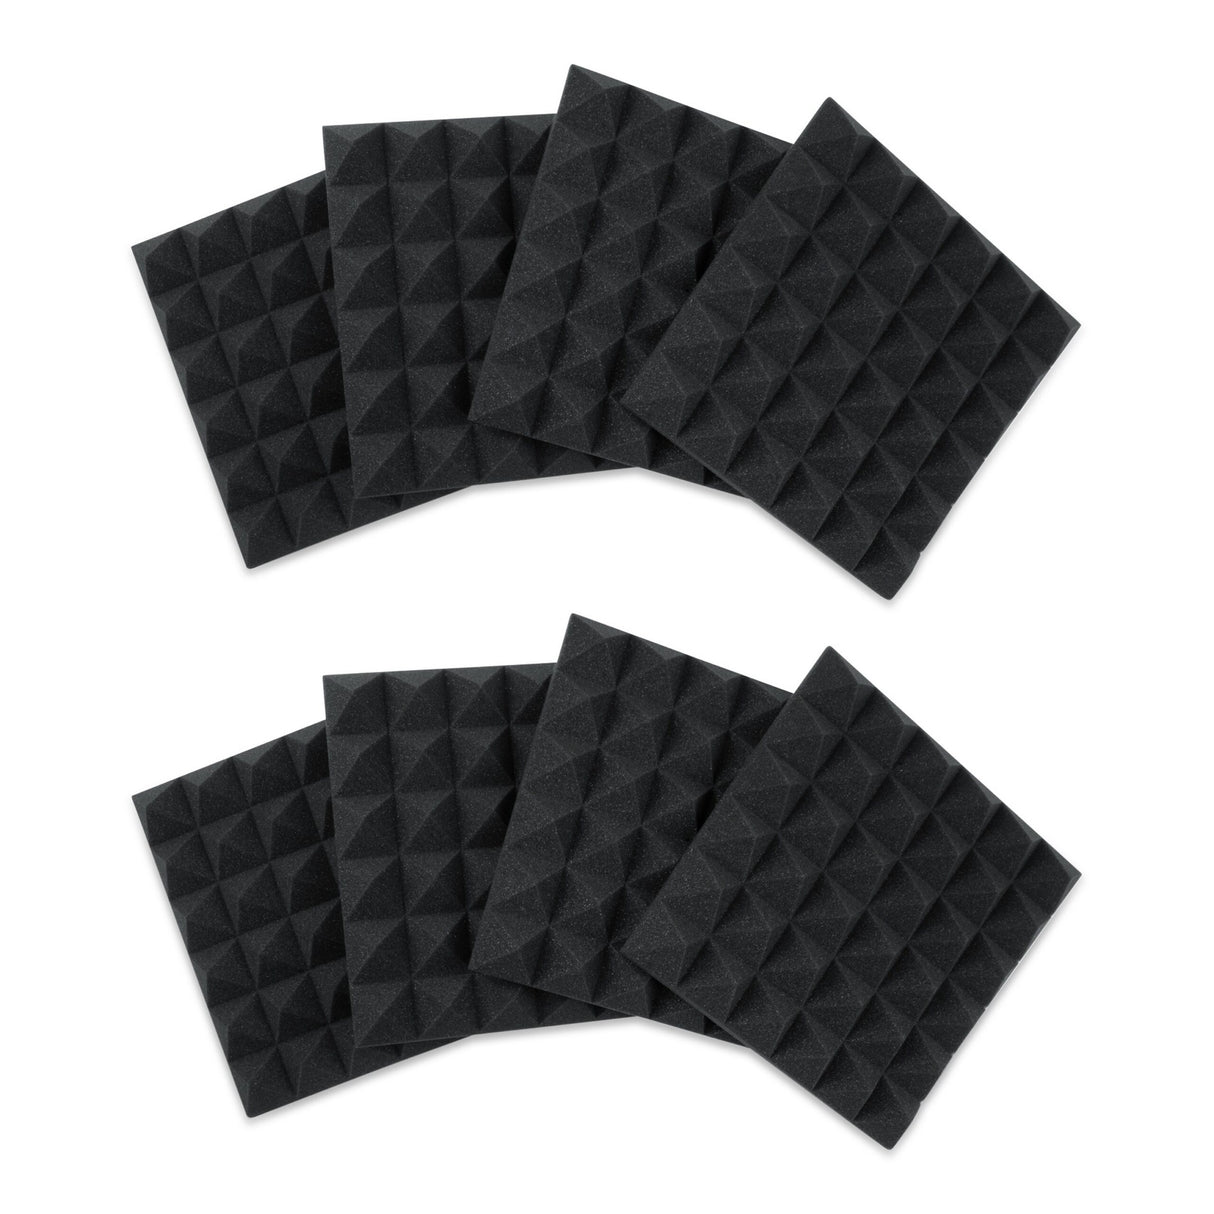 Gator GFW-ACPNL1212PCHA-8PK 8 Pack of Charcoal Acoustic Pyramid Panel, 12 x 12 Inches